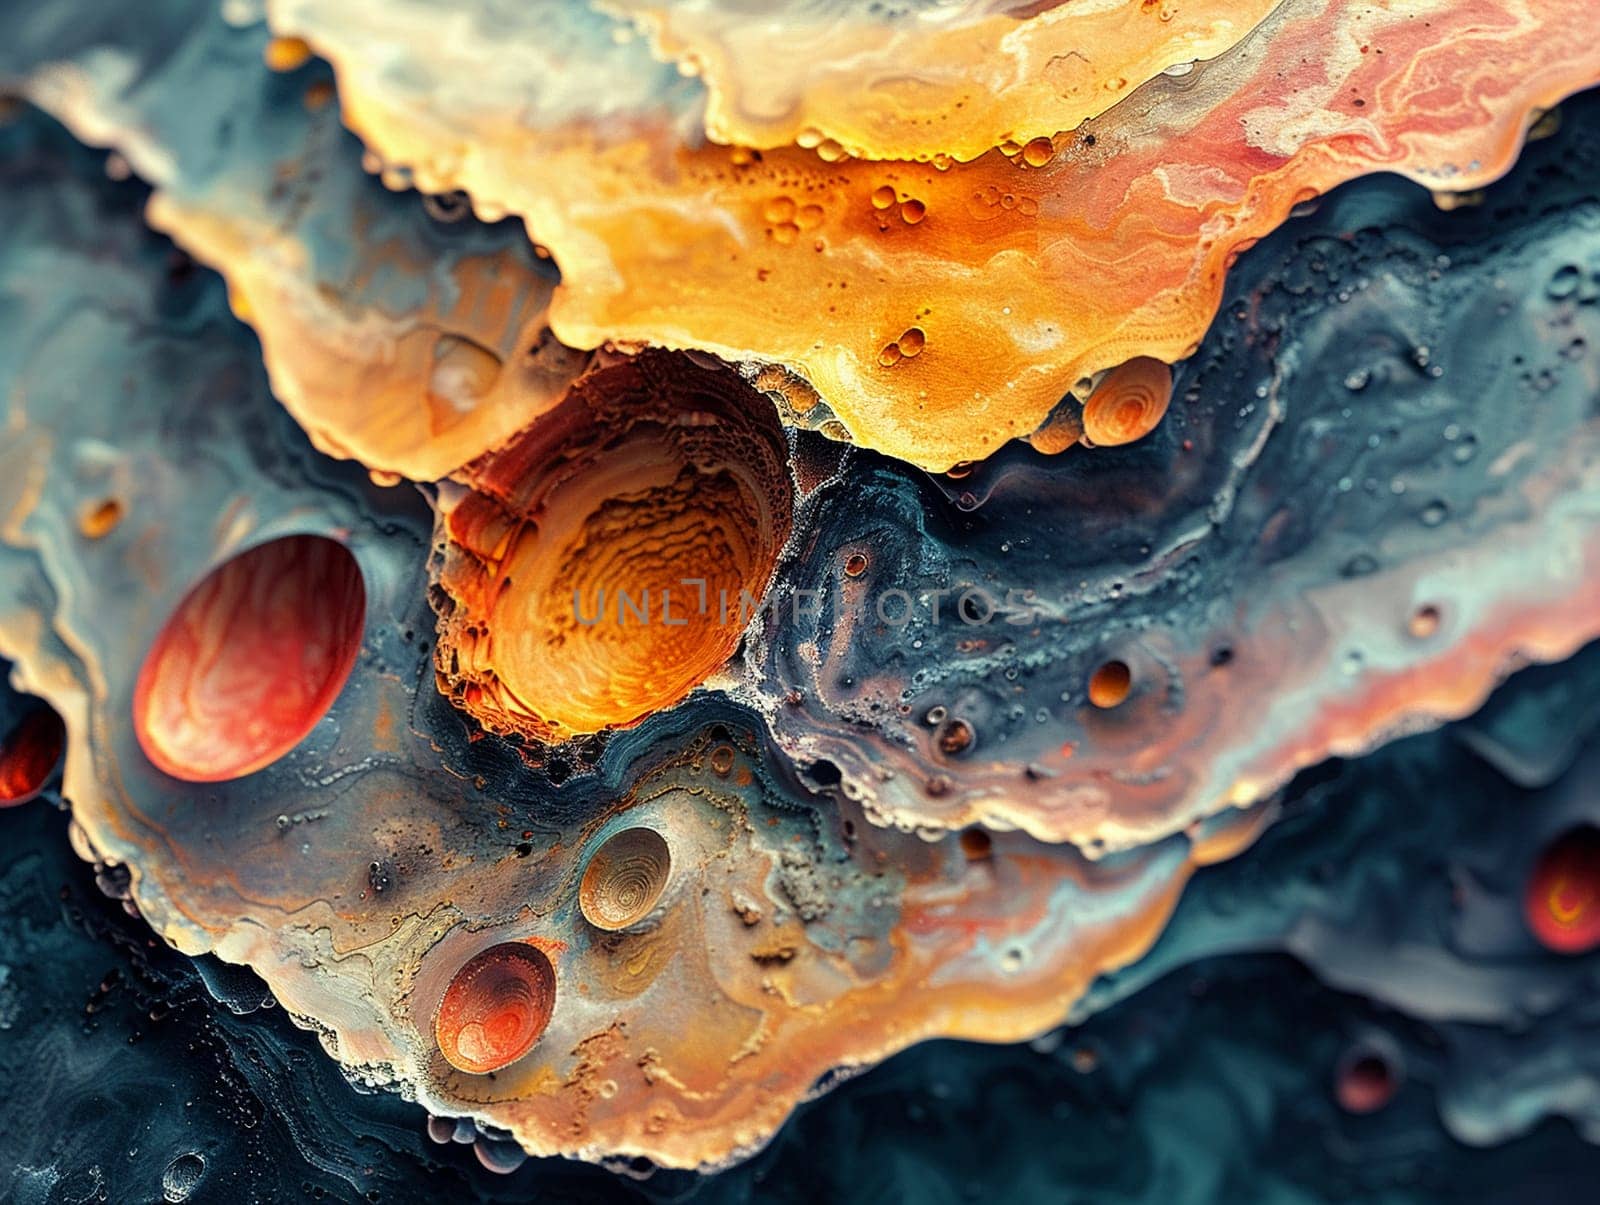 Textured surface of an alien planet by Benzoix